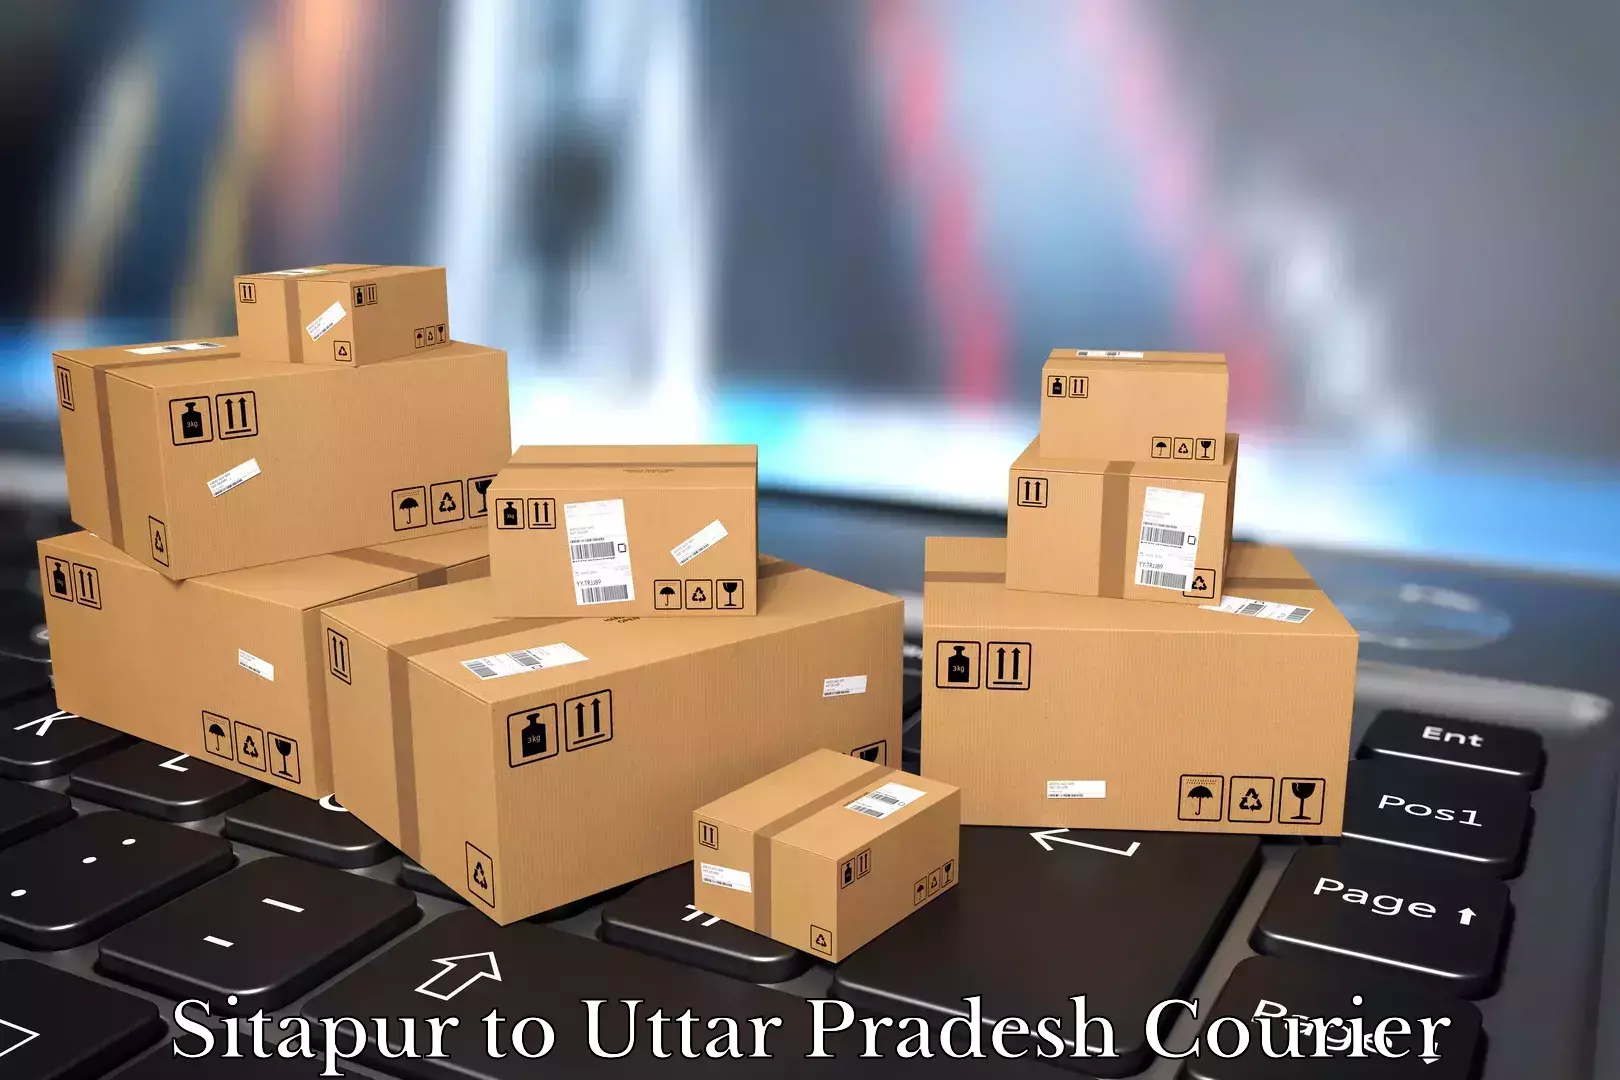 Comprehensive relocation services Sitapur to Agra